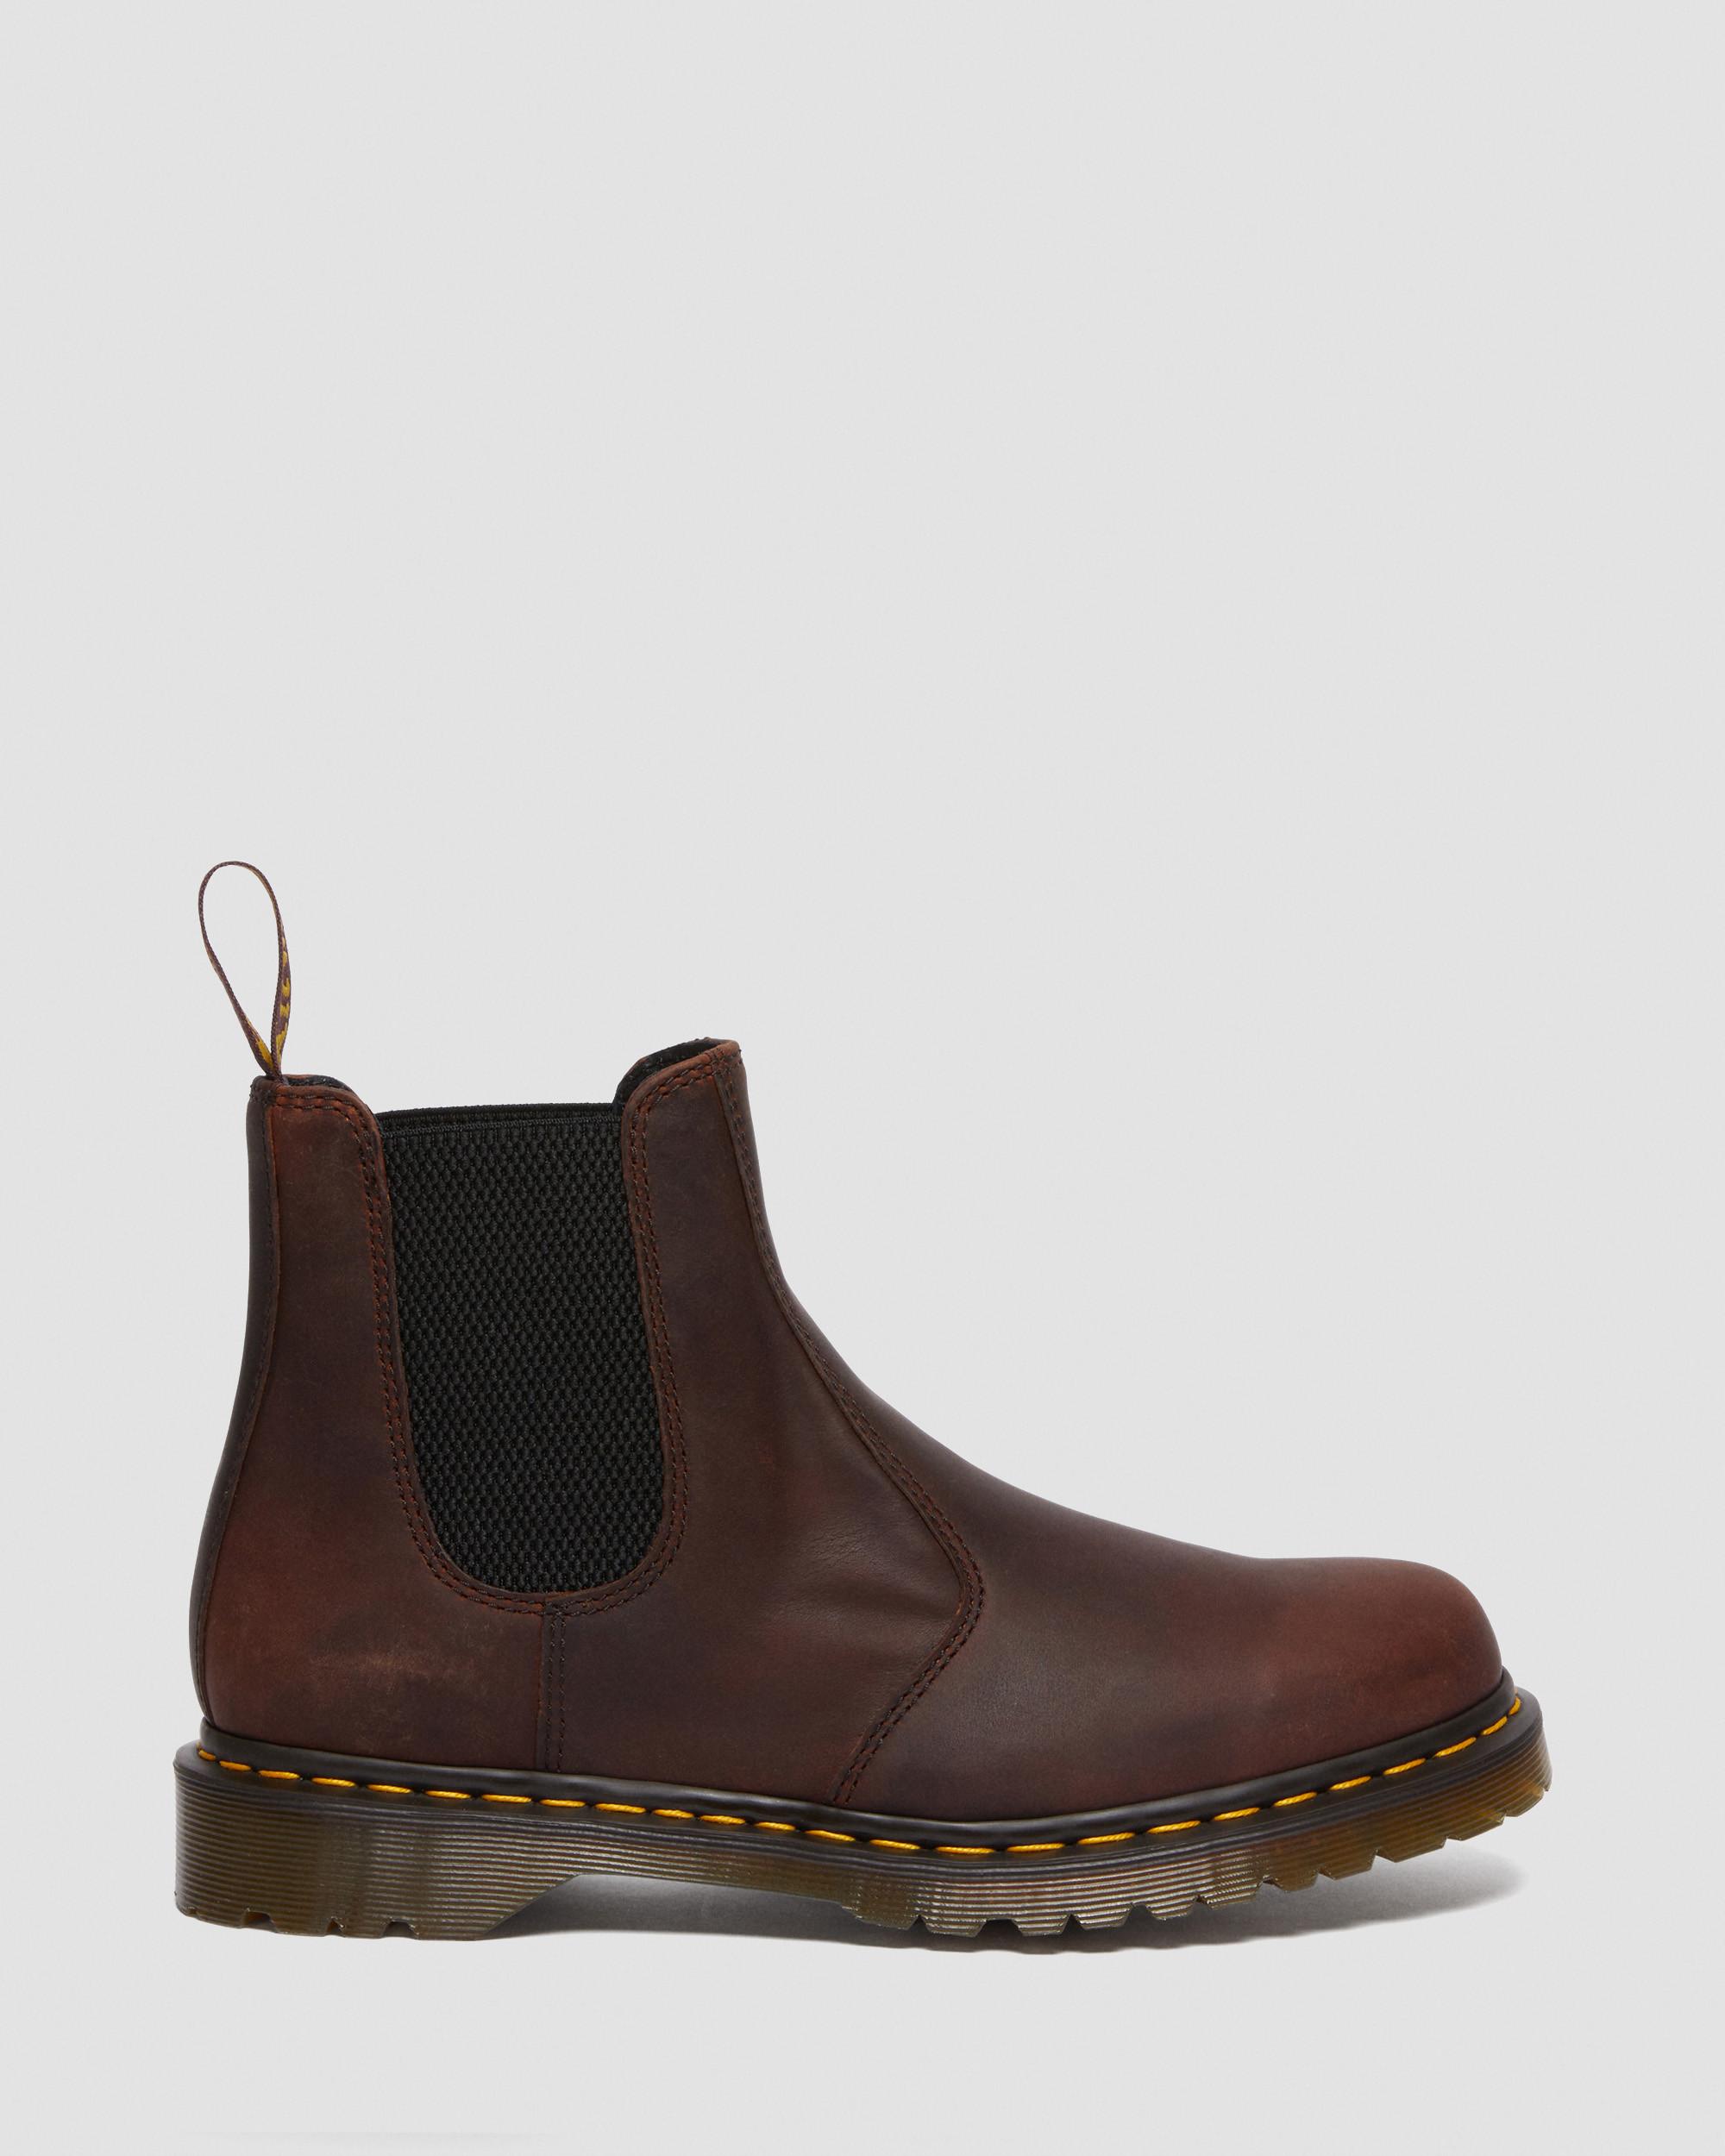 Savvy indeks overdrive 2976 Waxed Full Grain Leather Chelsea Boots | Dr. Martens